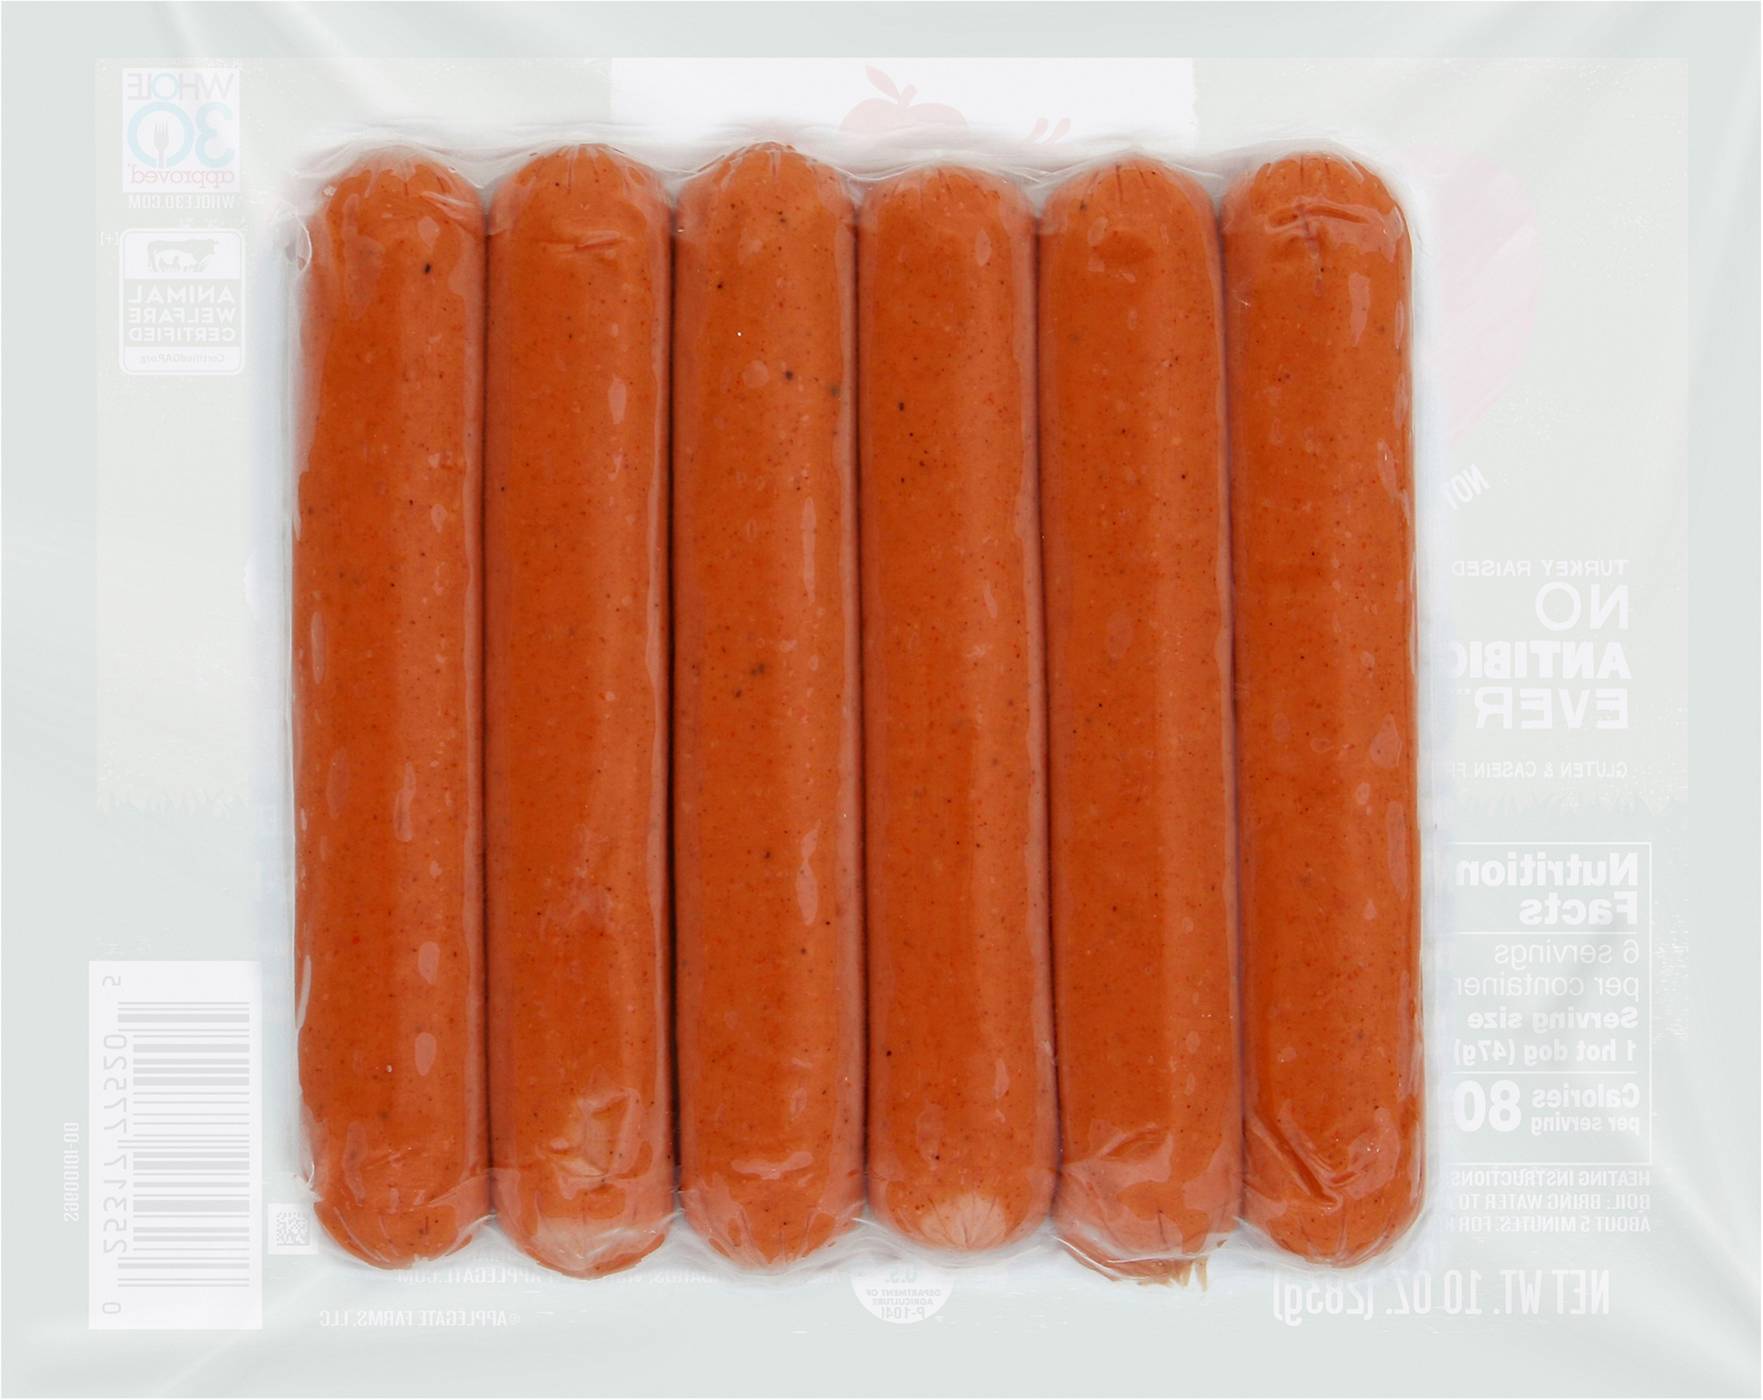 Applegate Naturals Uncured Turkey Hot Dogs; image 2 of 3